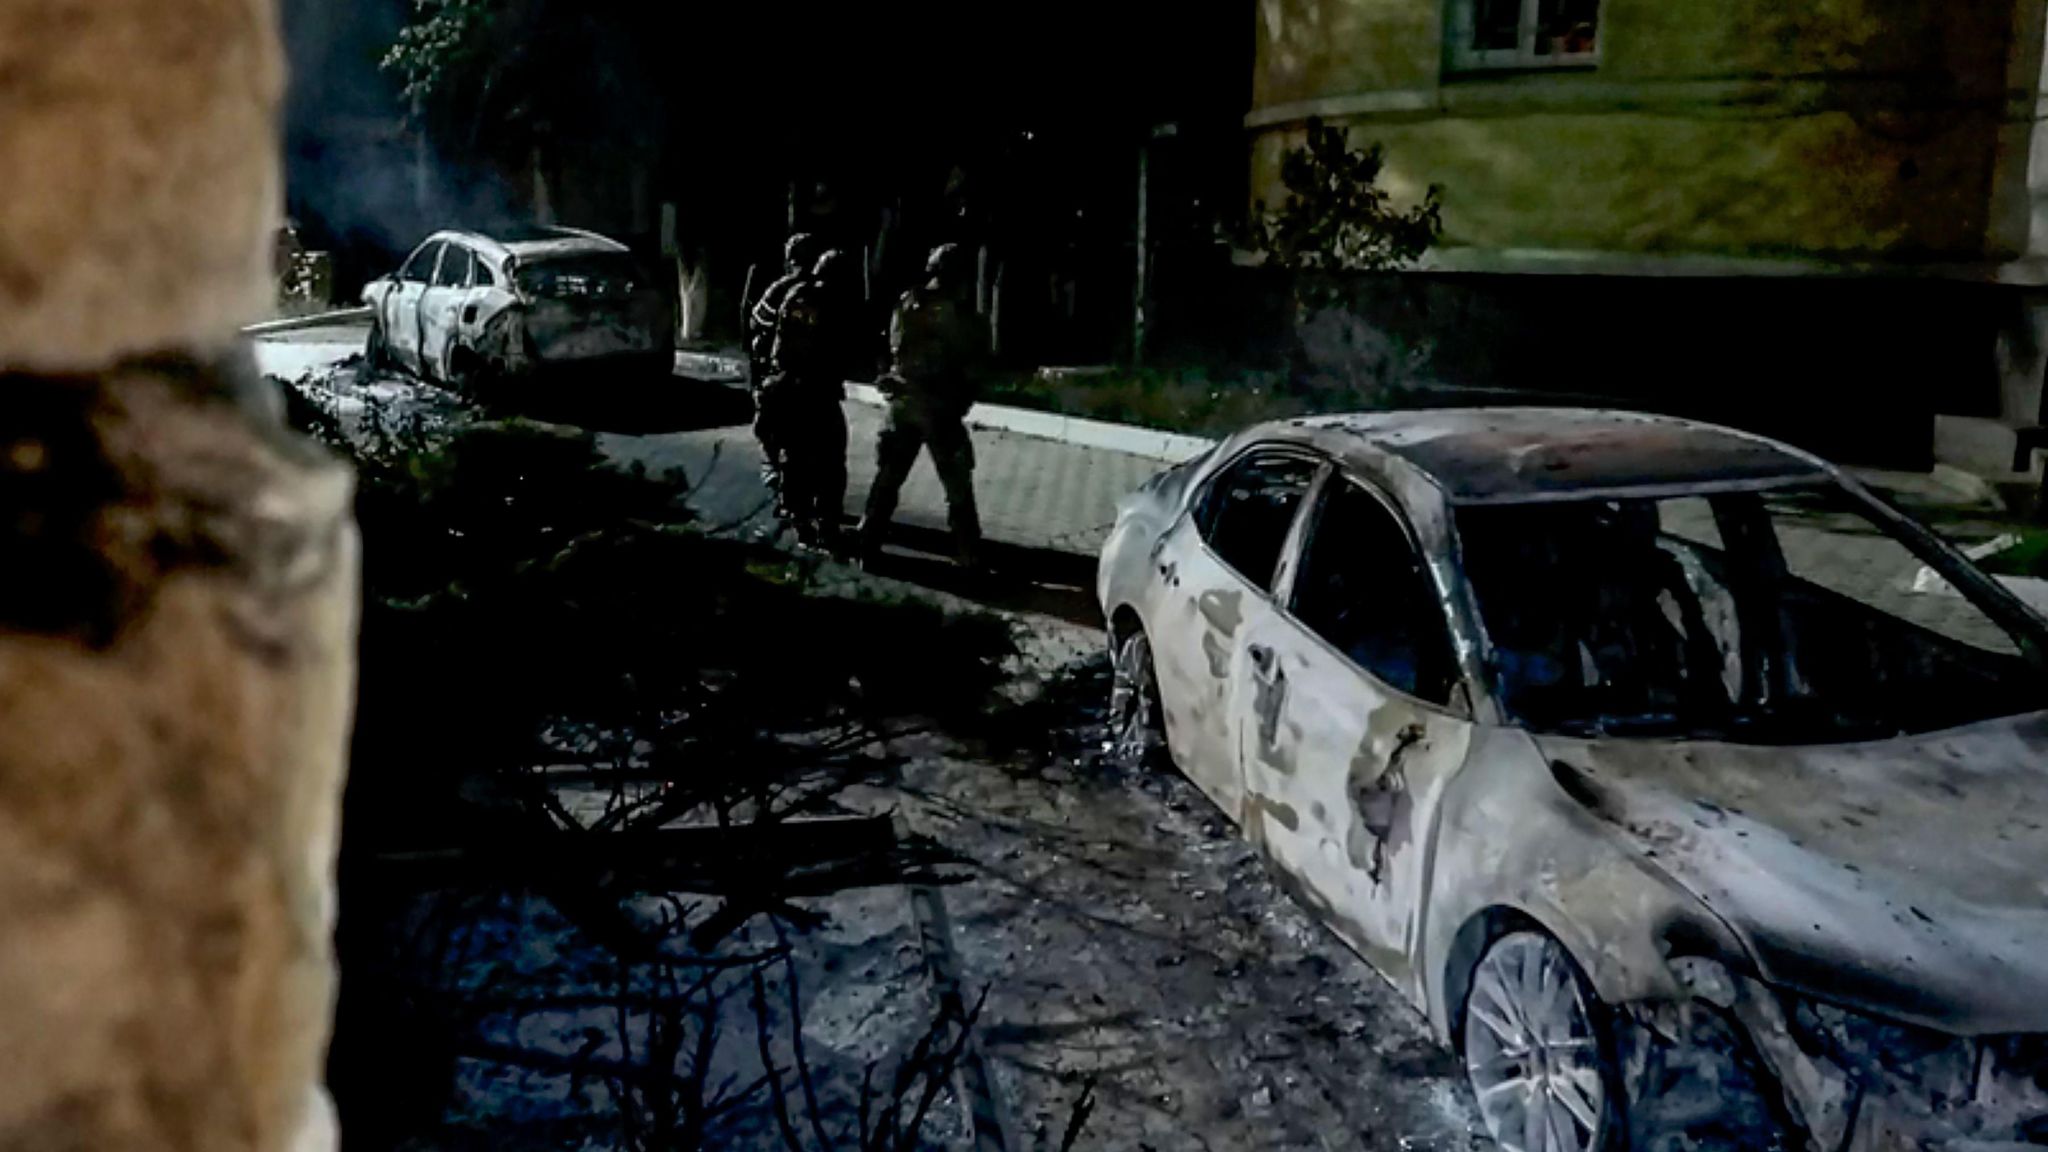 Russian Federal Security service officers approach a burnt out car following the attack